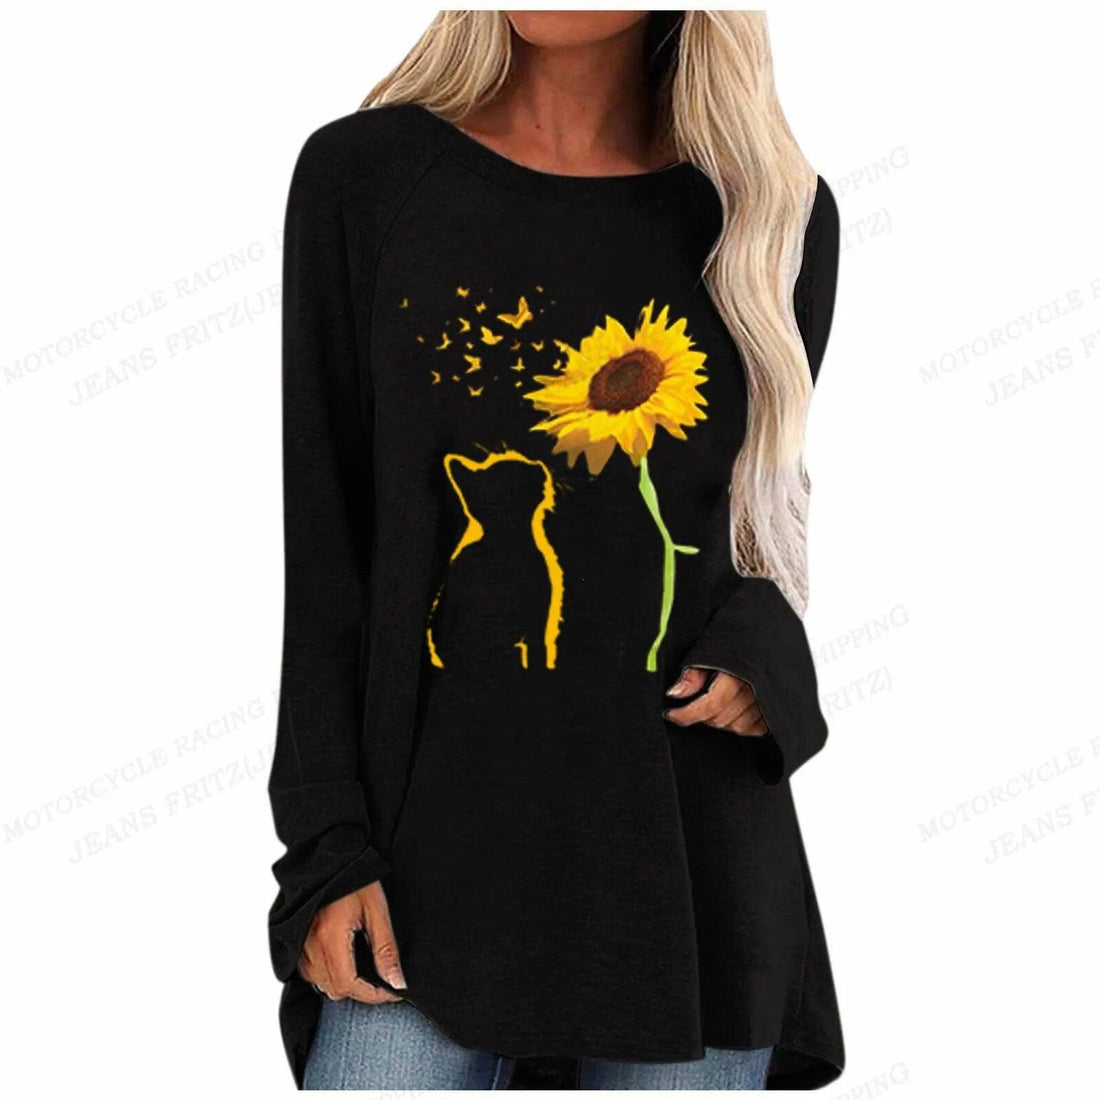 Long Sleeve Oversize Cat &amp; Sunflower Blouse, 4 Colors, S-5XL - Just Cats - Gifts for Cat Lovers